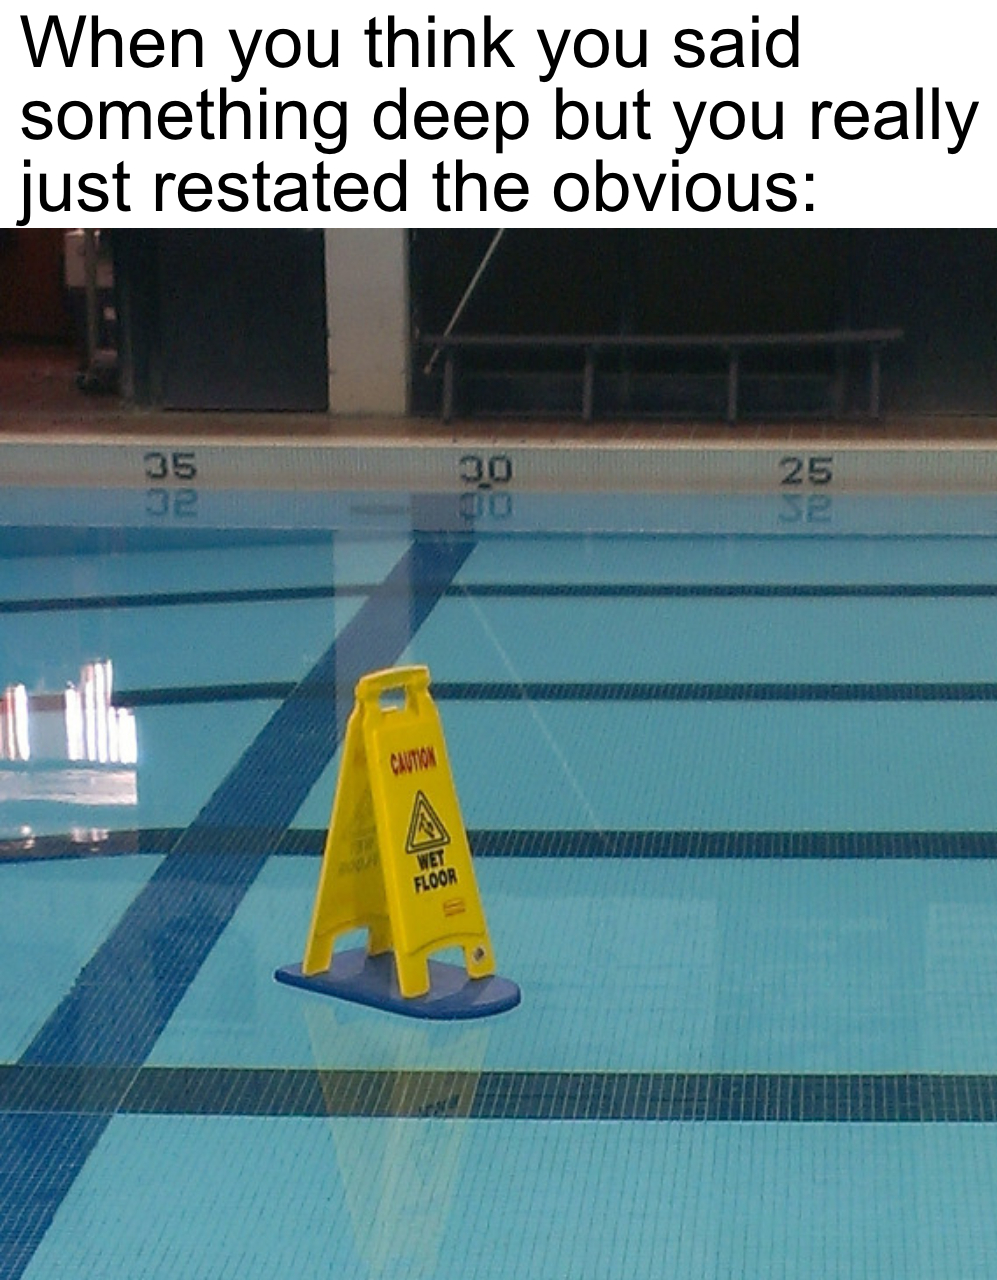 funny wet floor signs - When you think you said something deep but you really just restated the obvious 35 30 25 se 2 5 070 A Floom